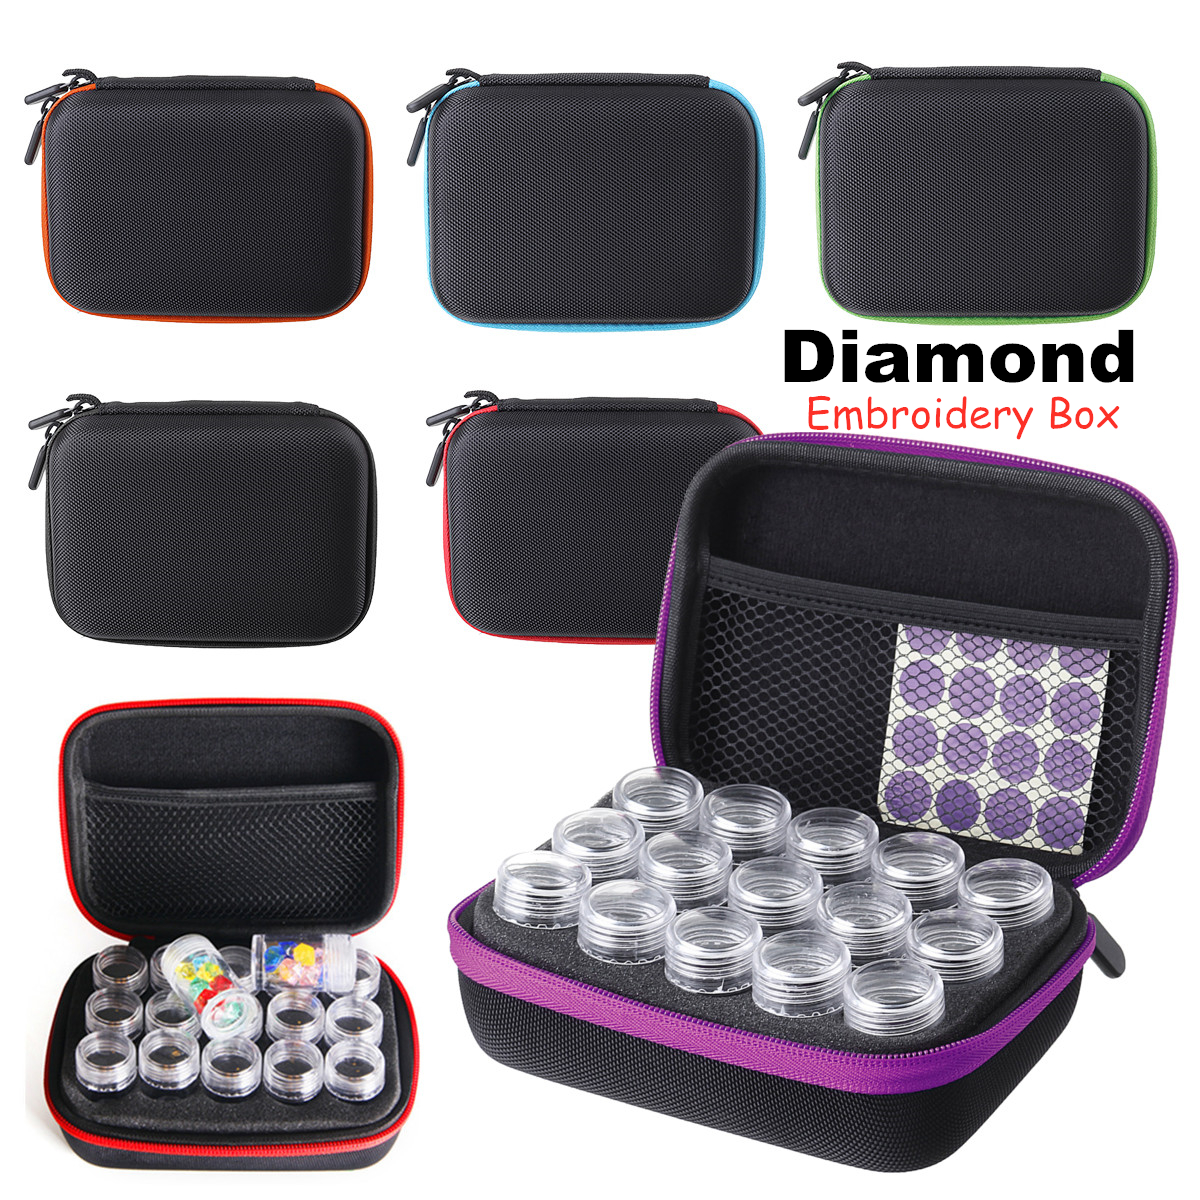 15-Solts-Diamond-Painting-Box-Embroidery-Case-Organizer-Storage-Accessories-Tool-Parts-Storage-Box-1578979-1